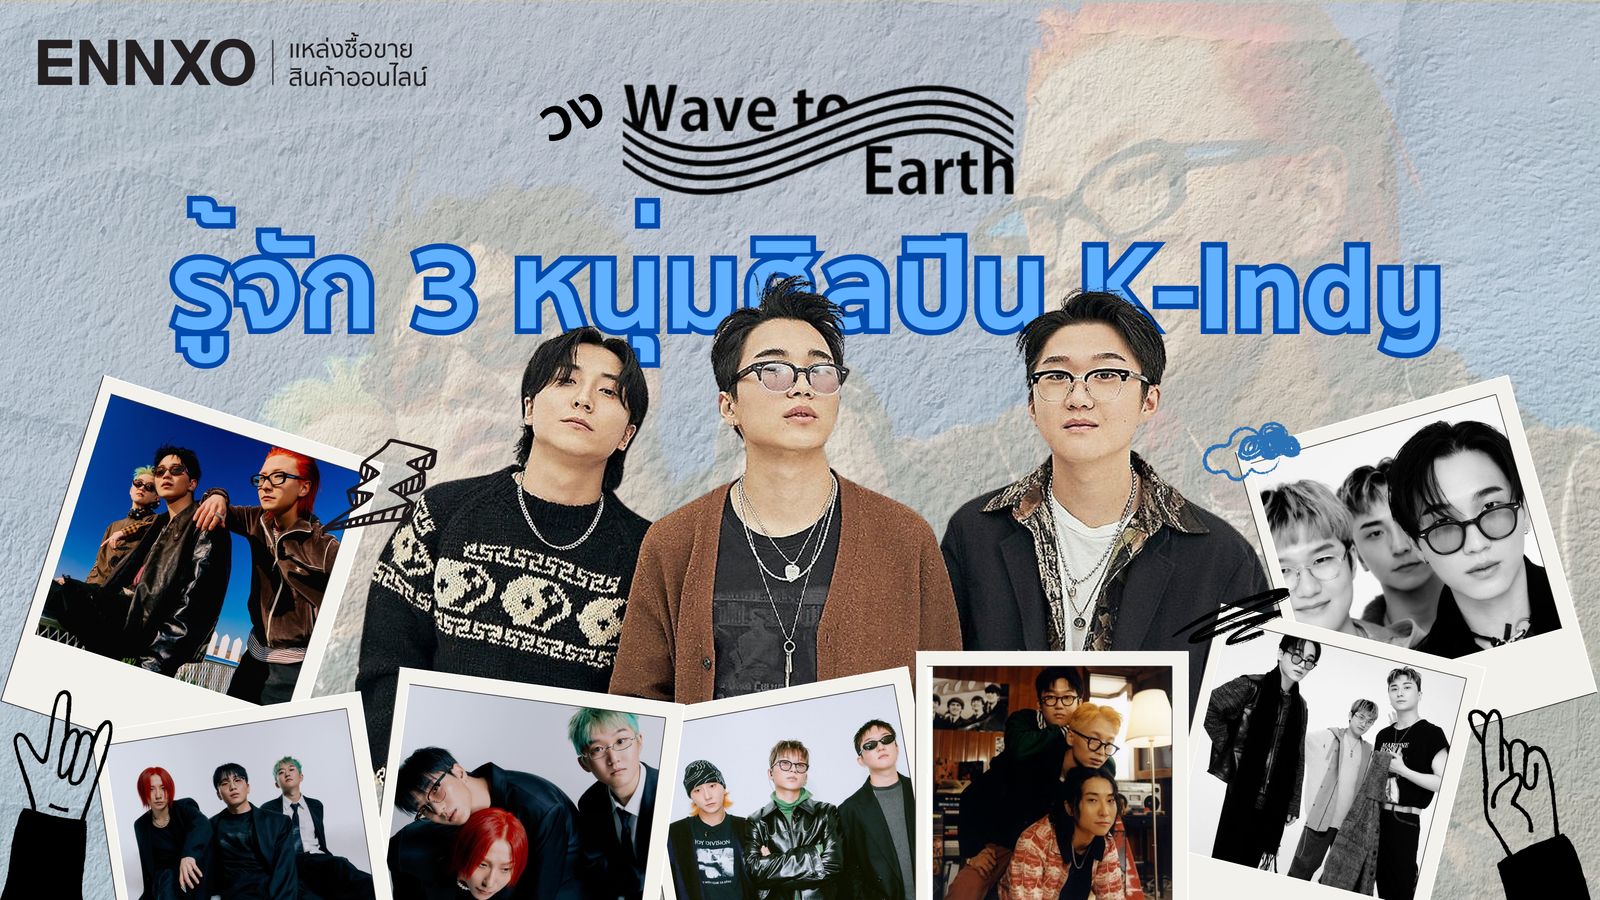 wave to earth is a three-member boy band